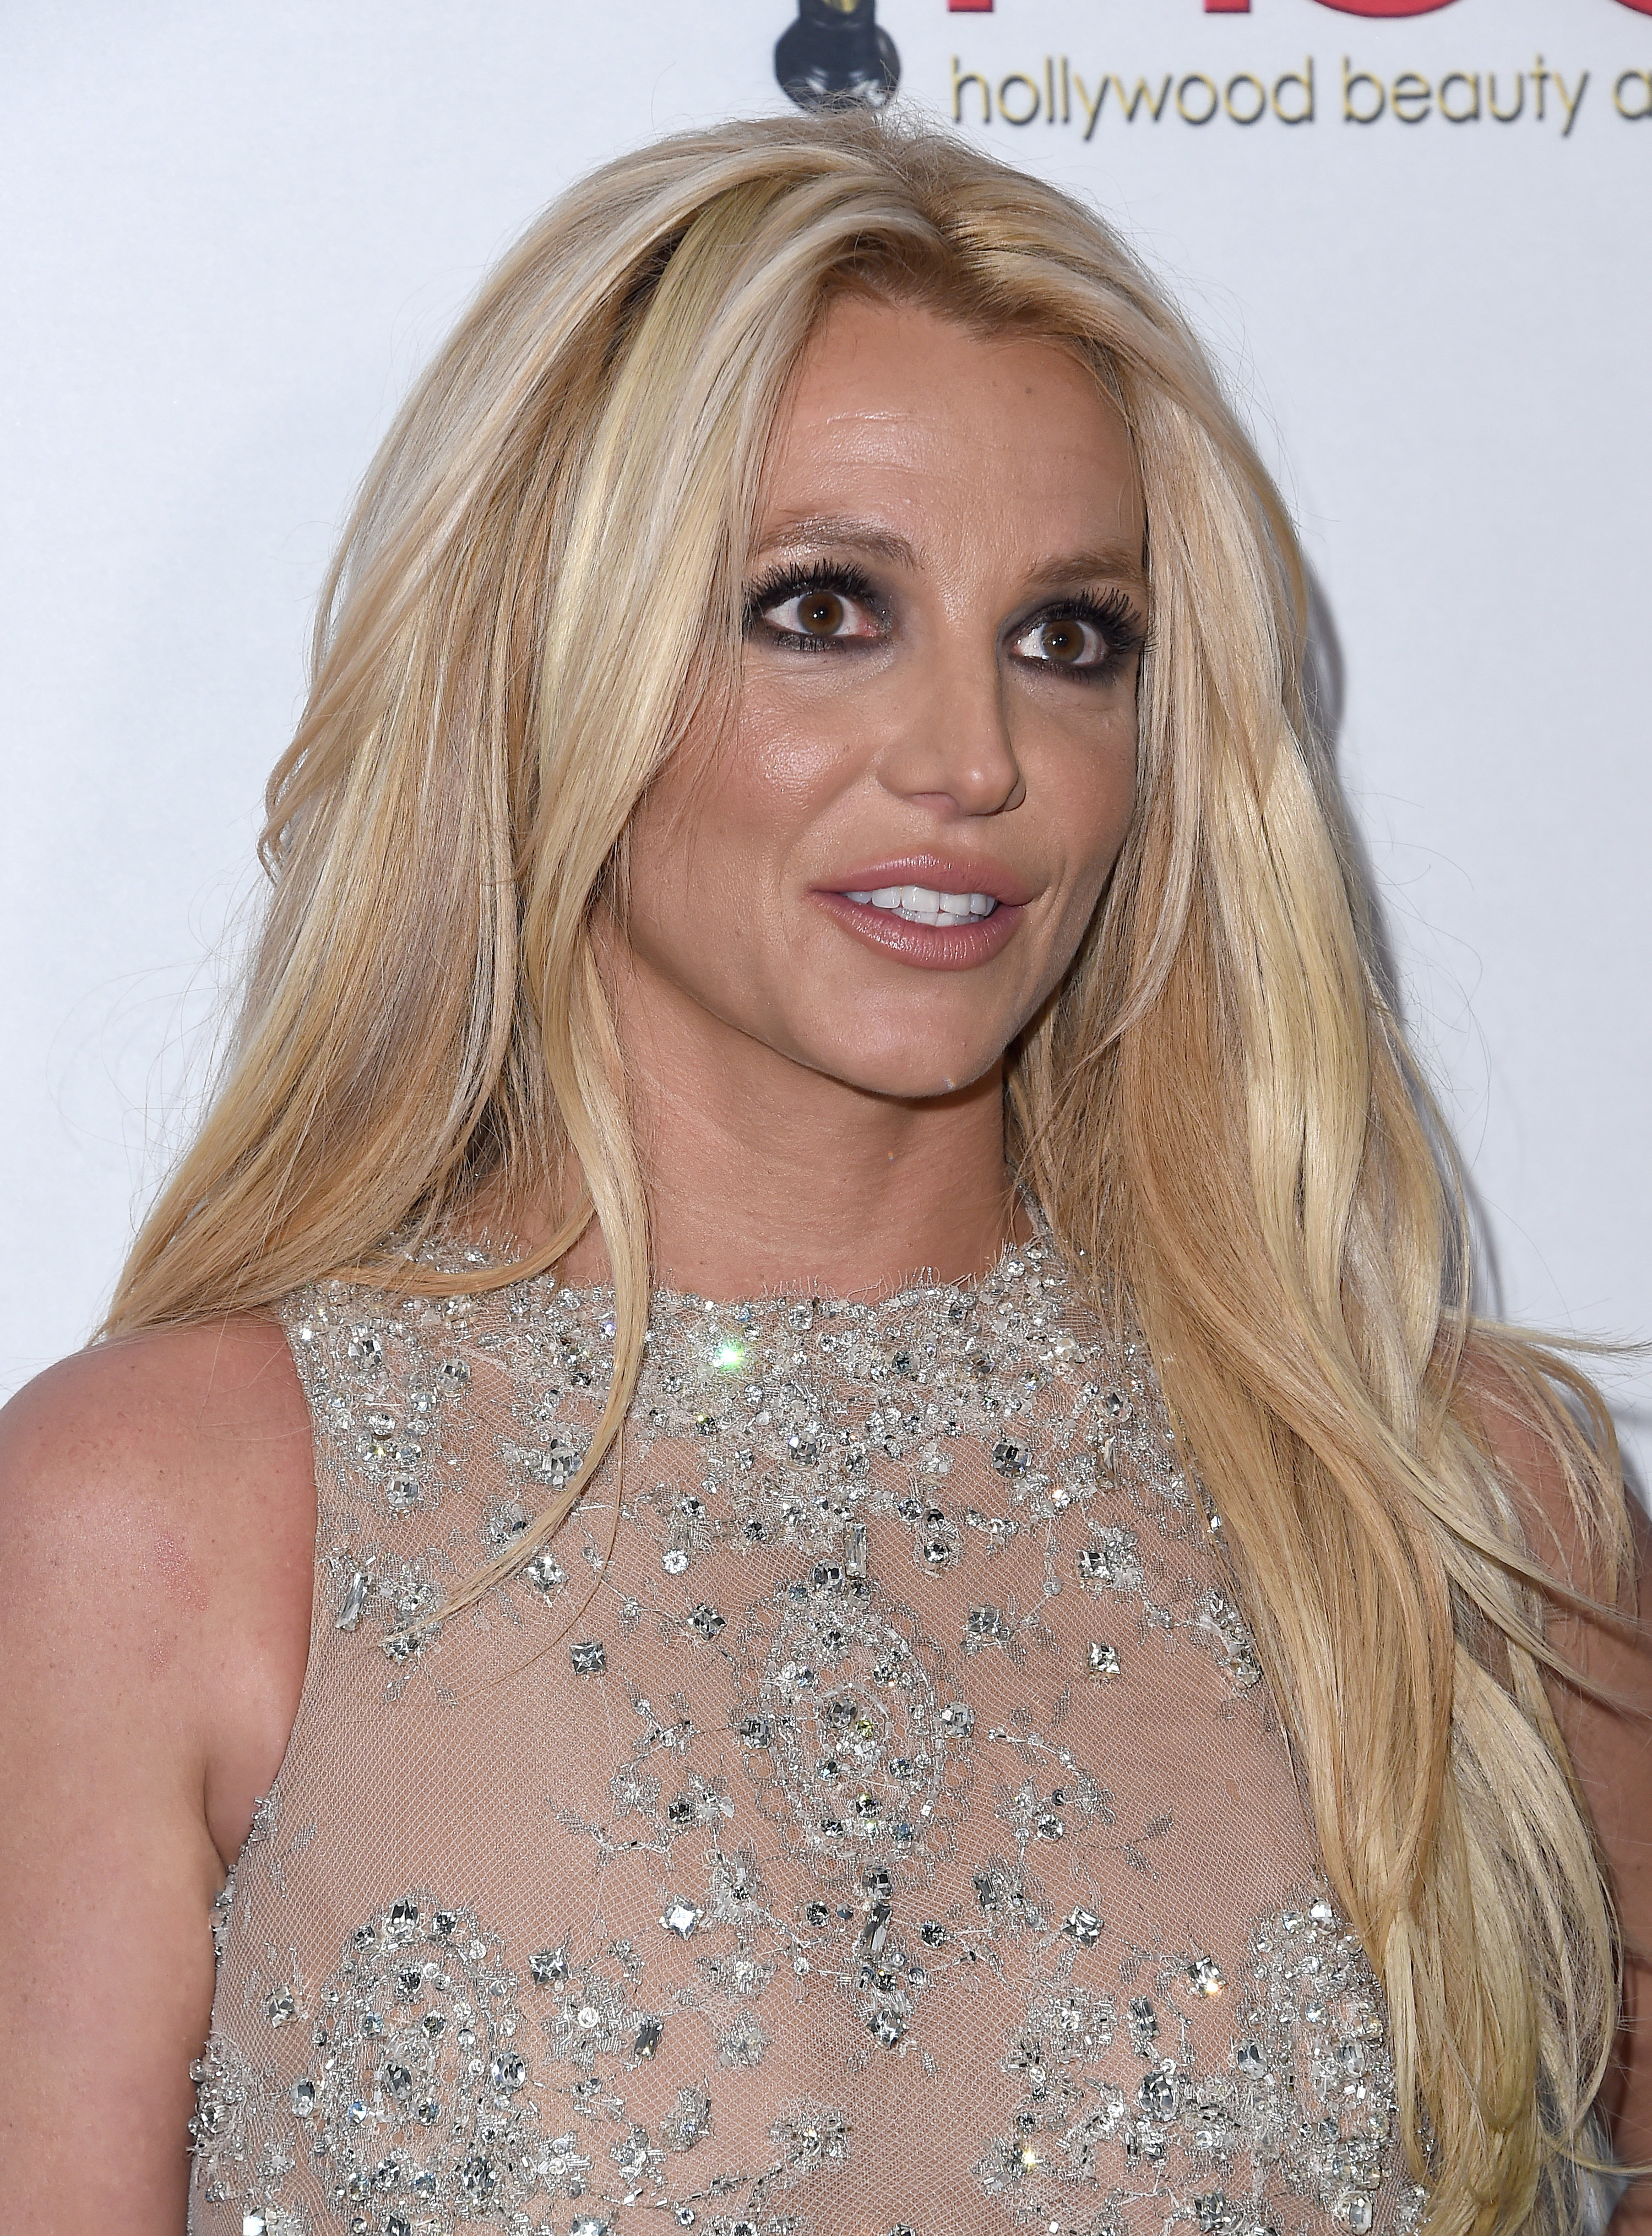 A close-up of Britney in a sleeveless shiny, diaphanous outfit